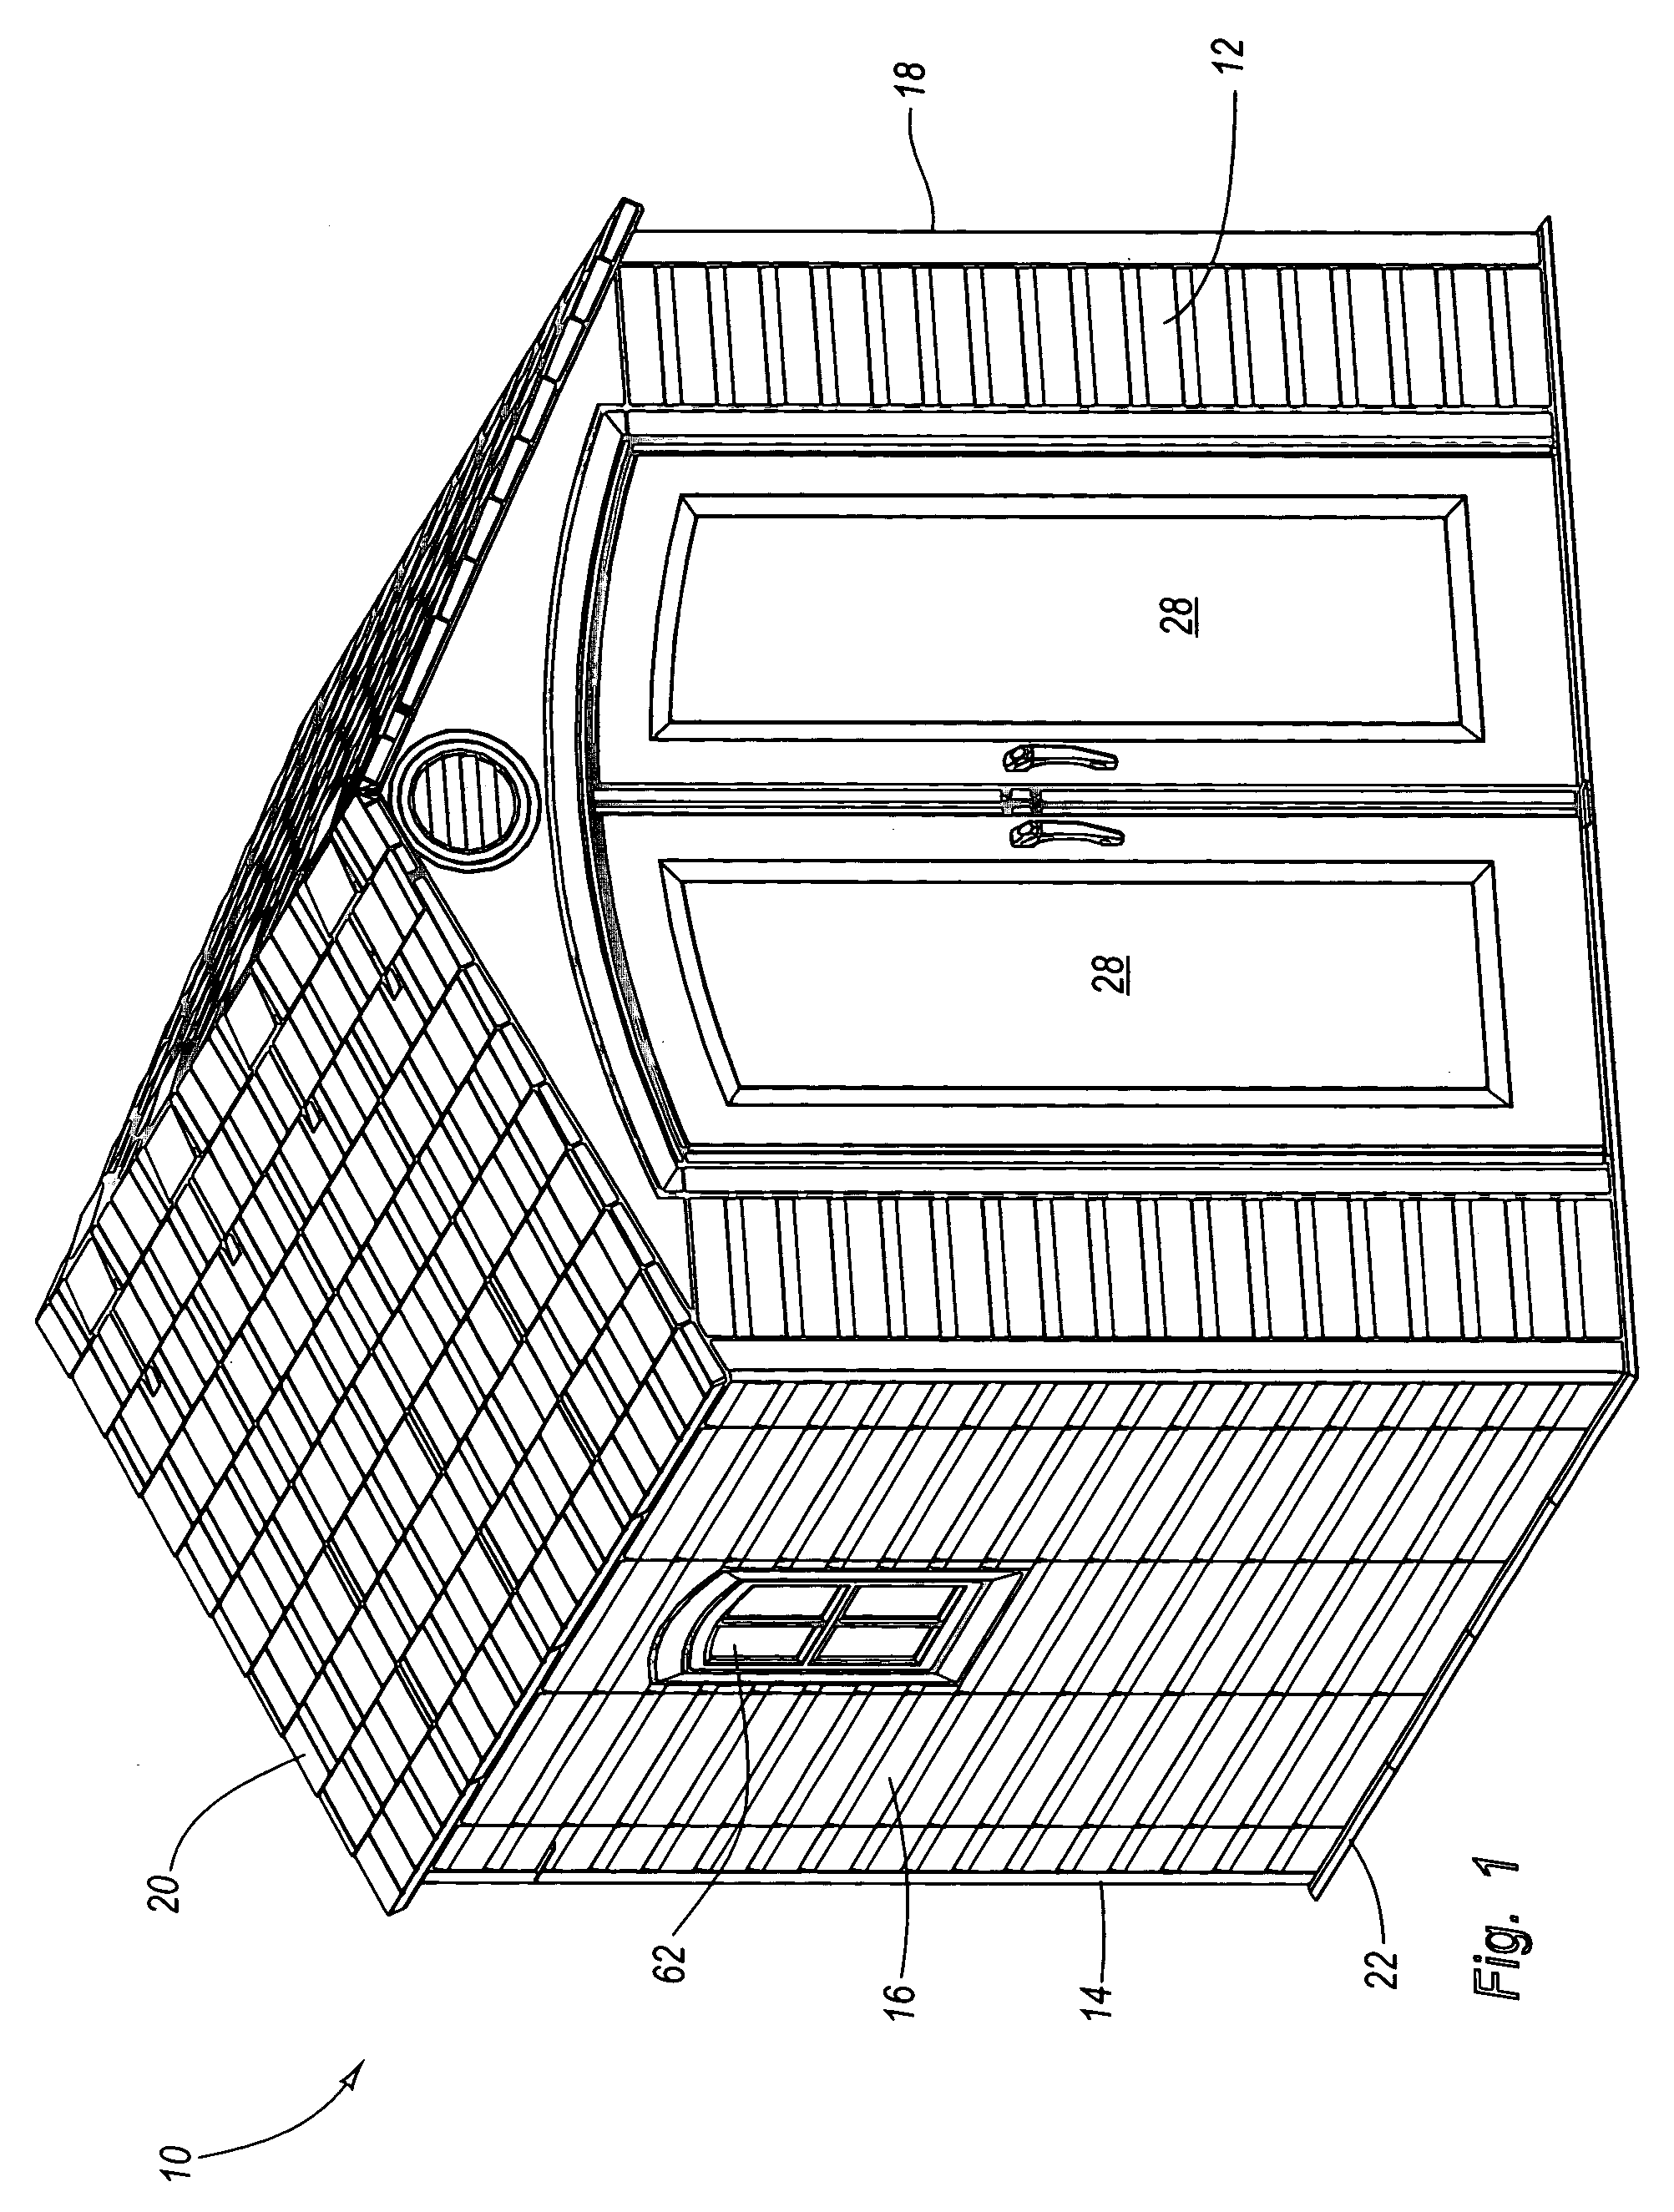 Packaging system for a modular enclosure